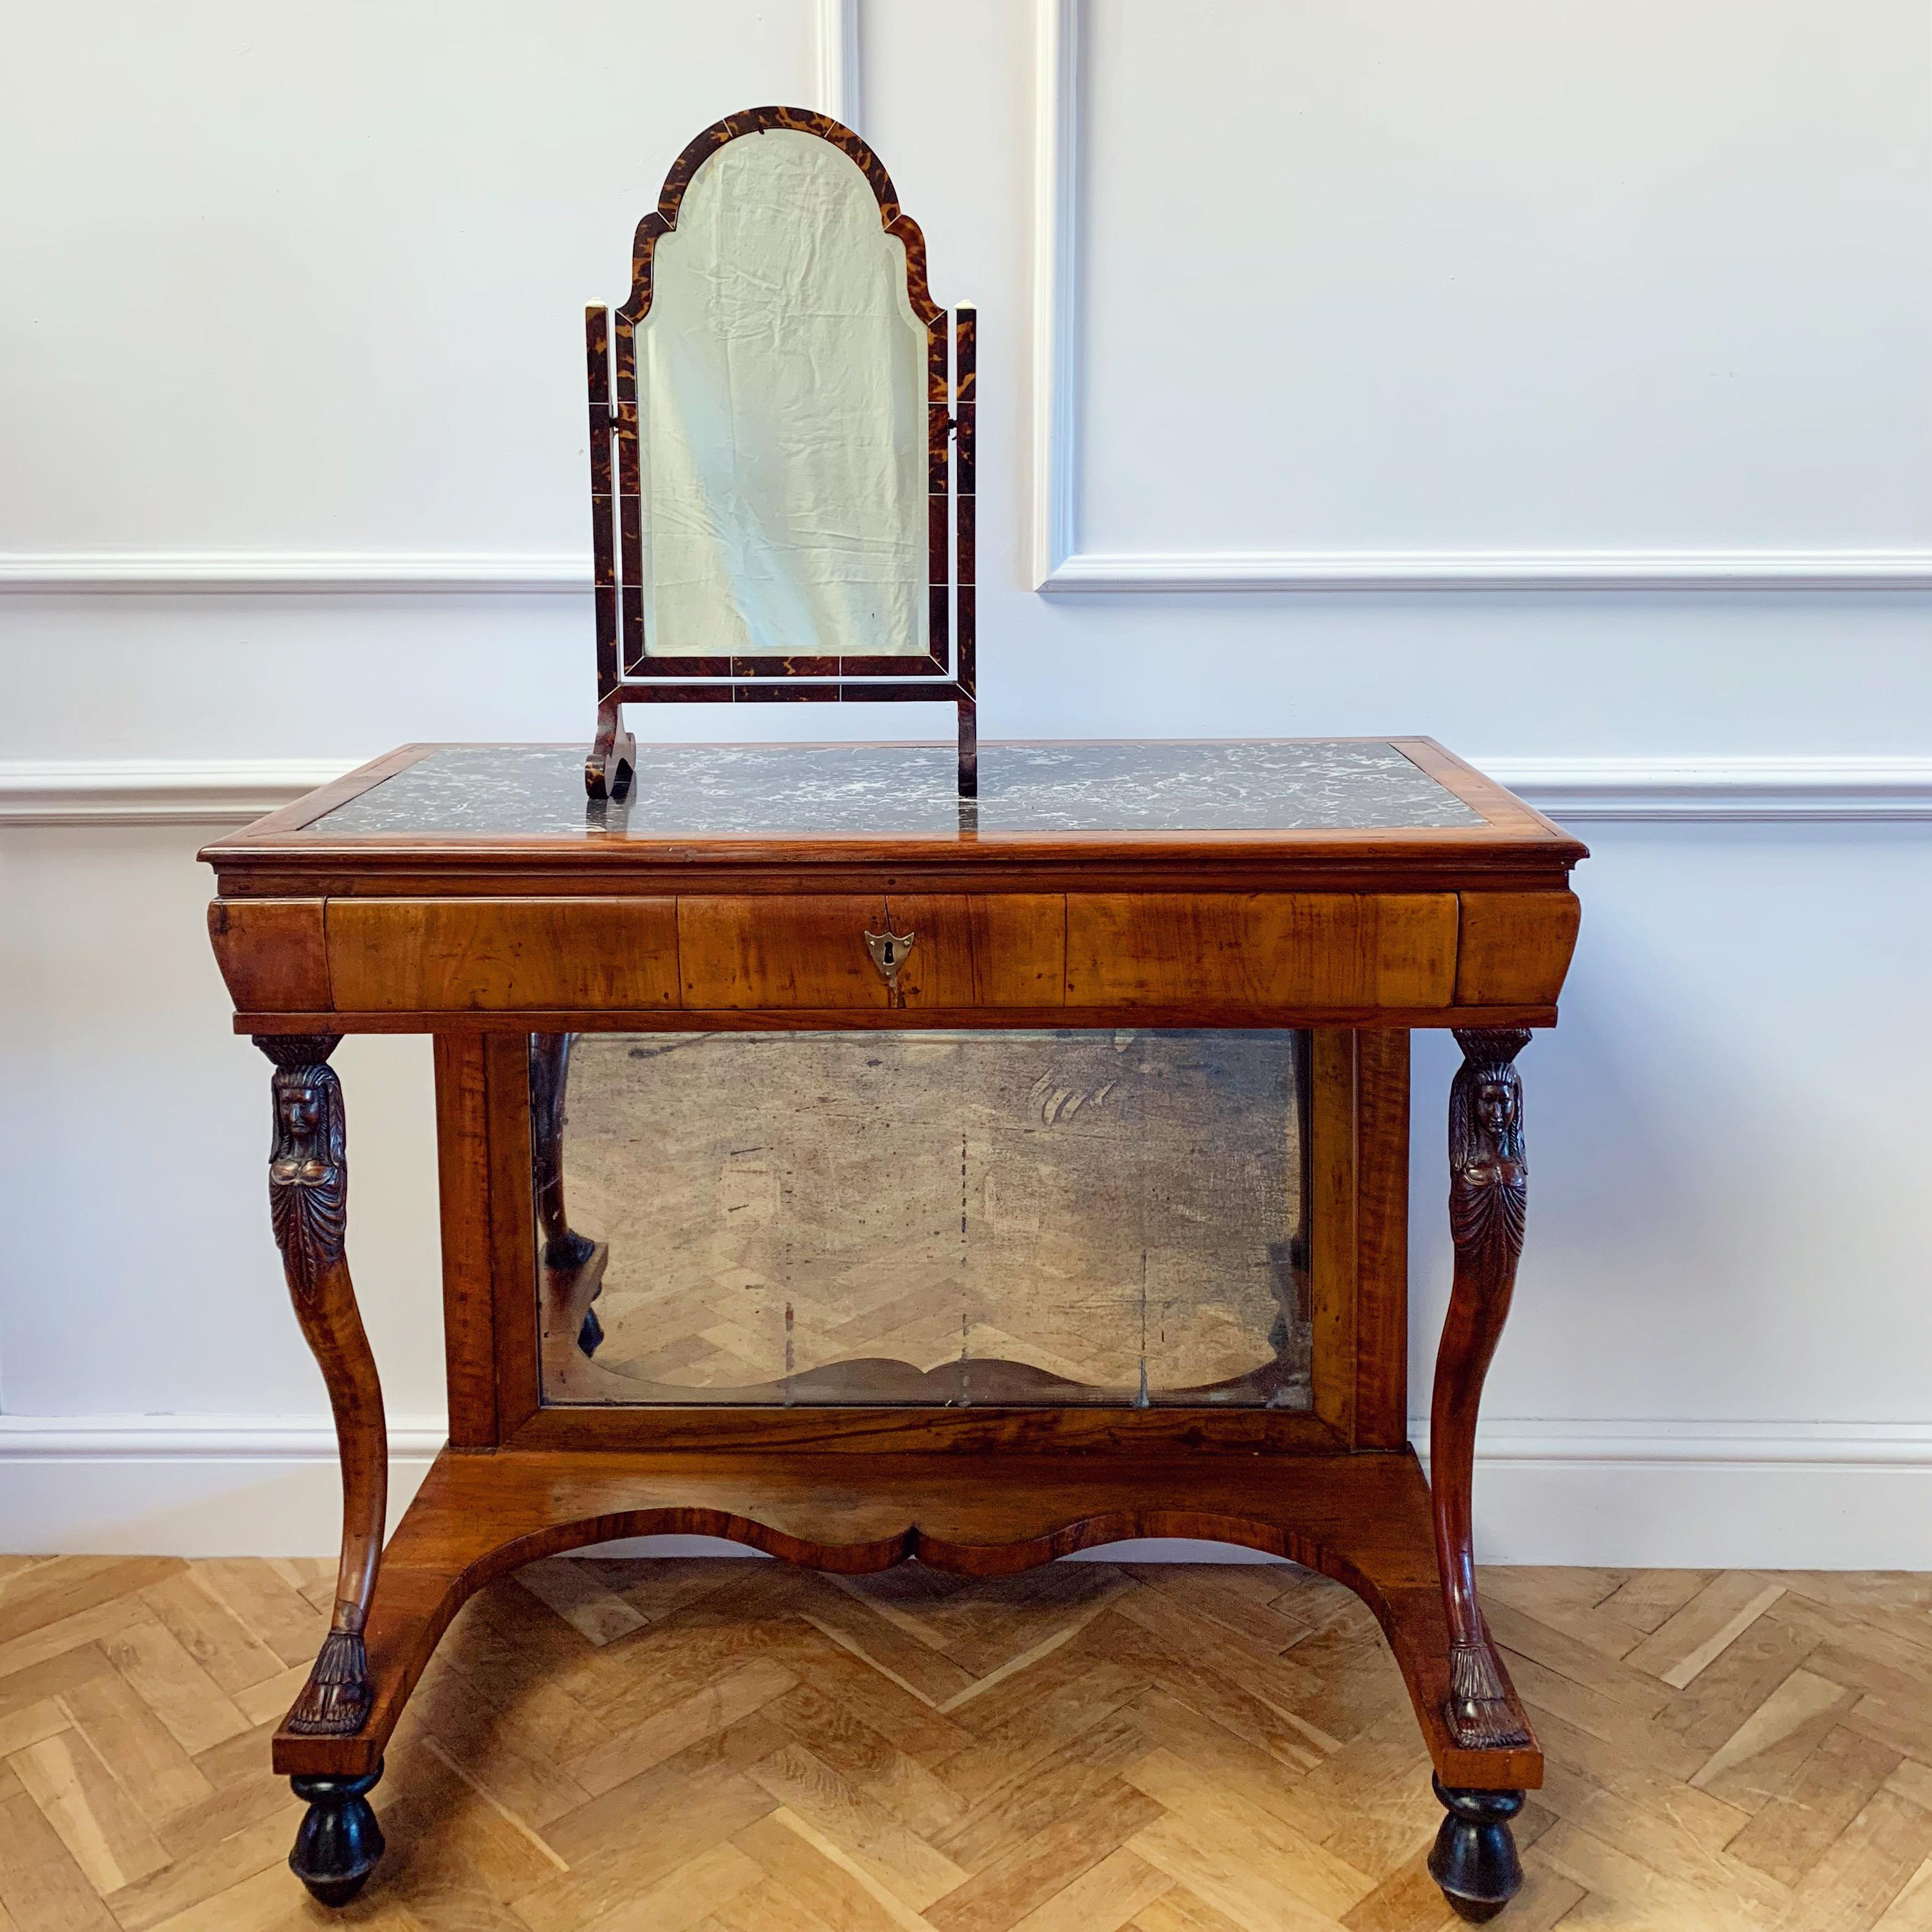 An Edwardian Dressing Mirror Veneered in Tortoiseshell In Good Condition For Sale In London, GB